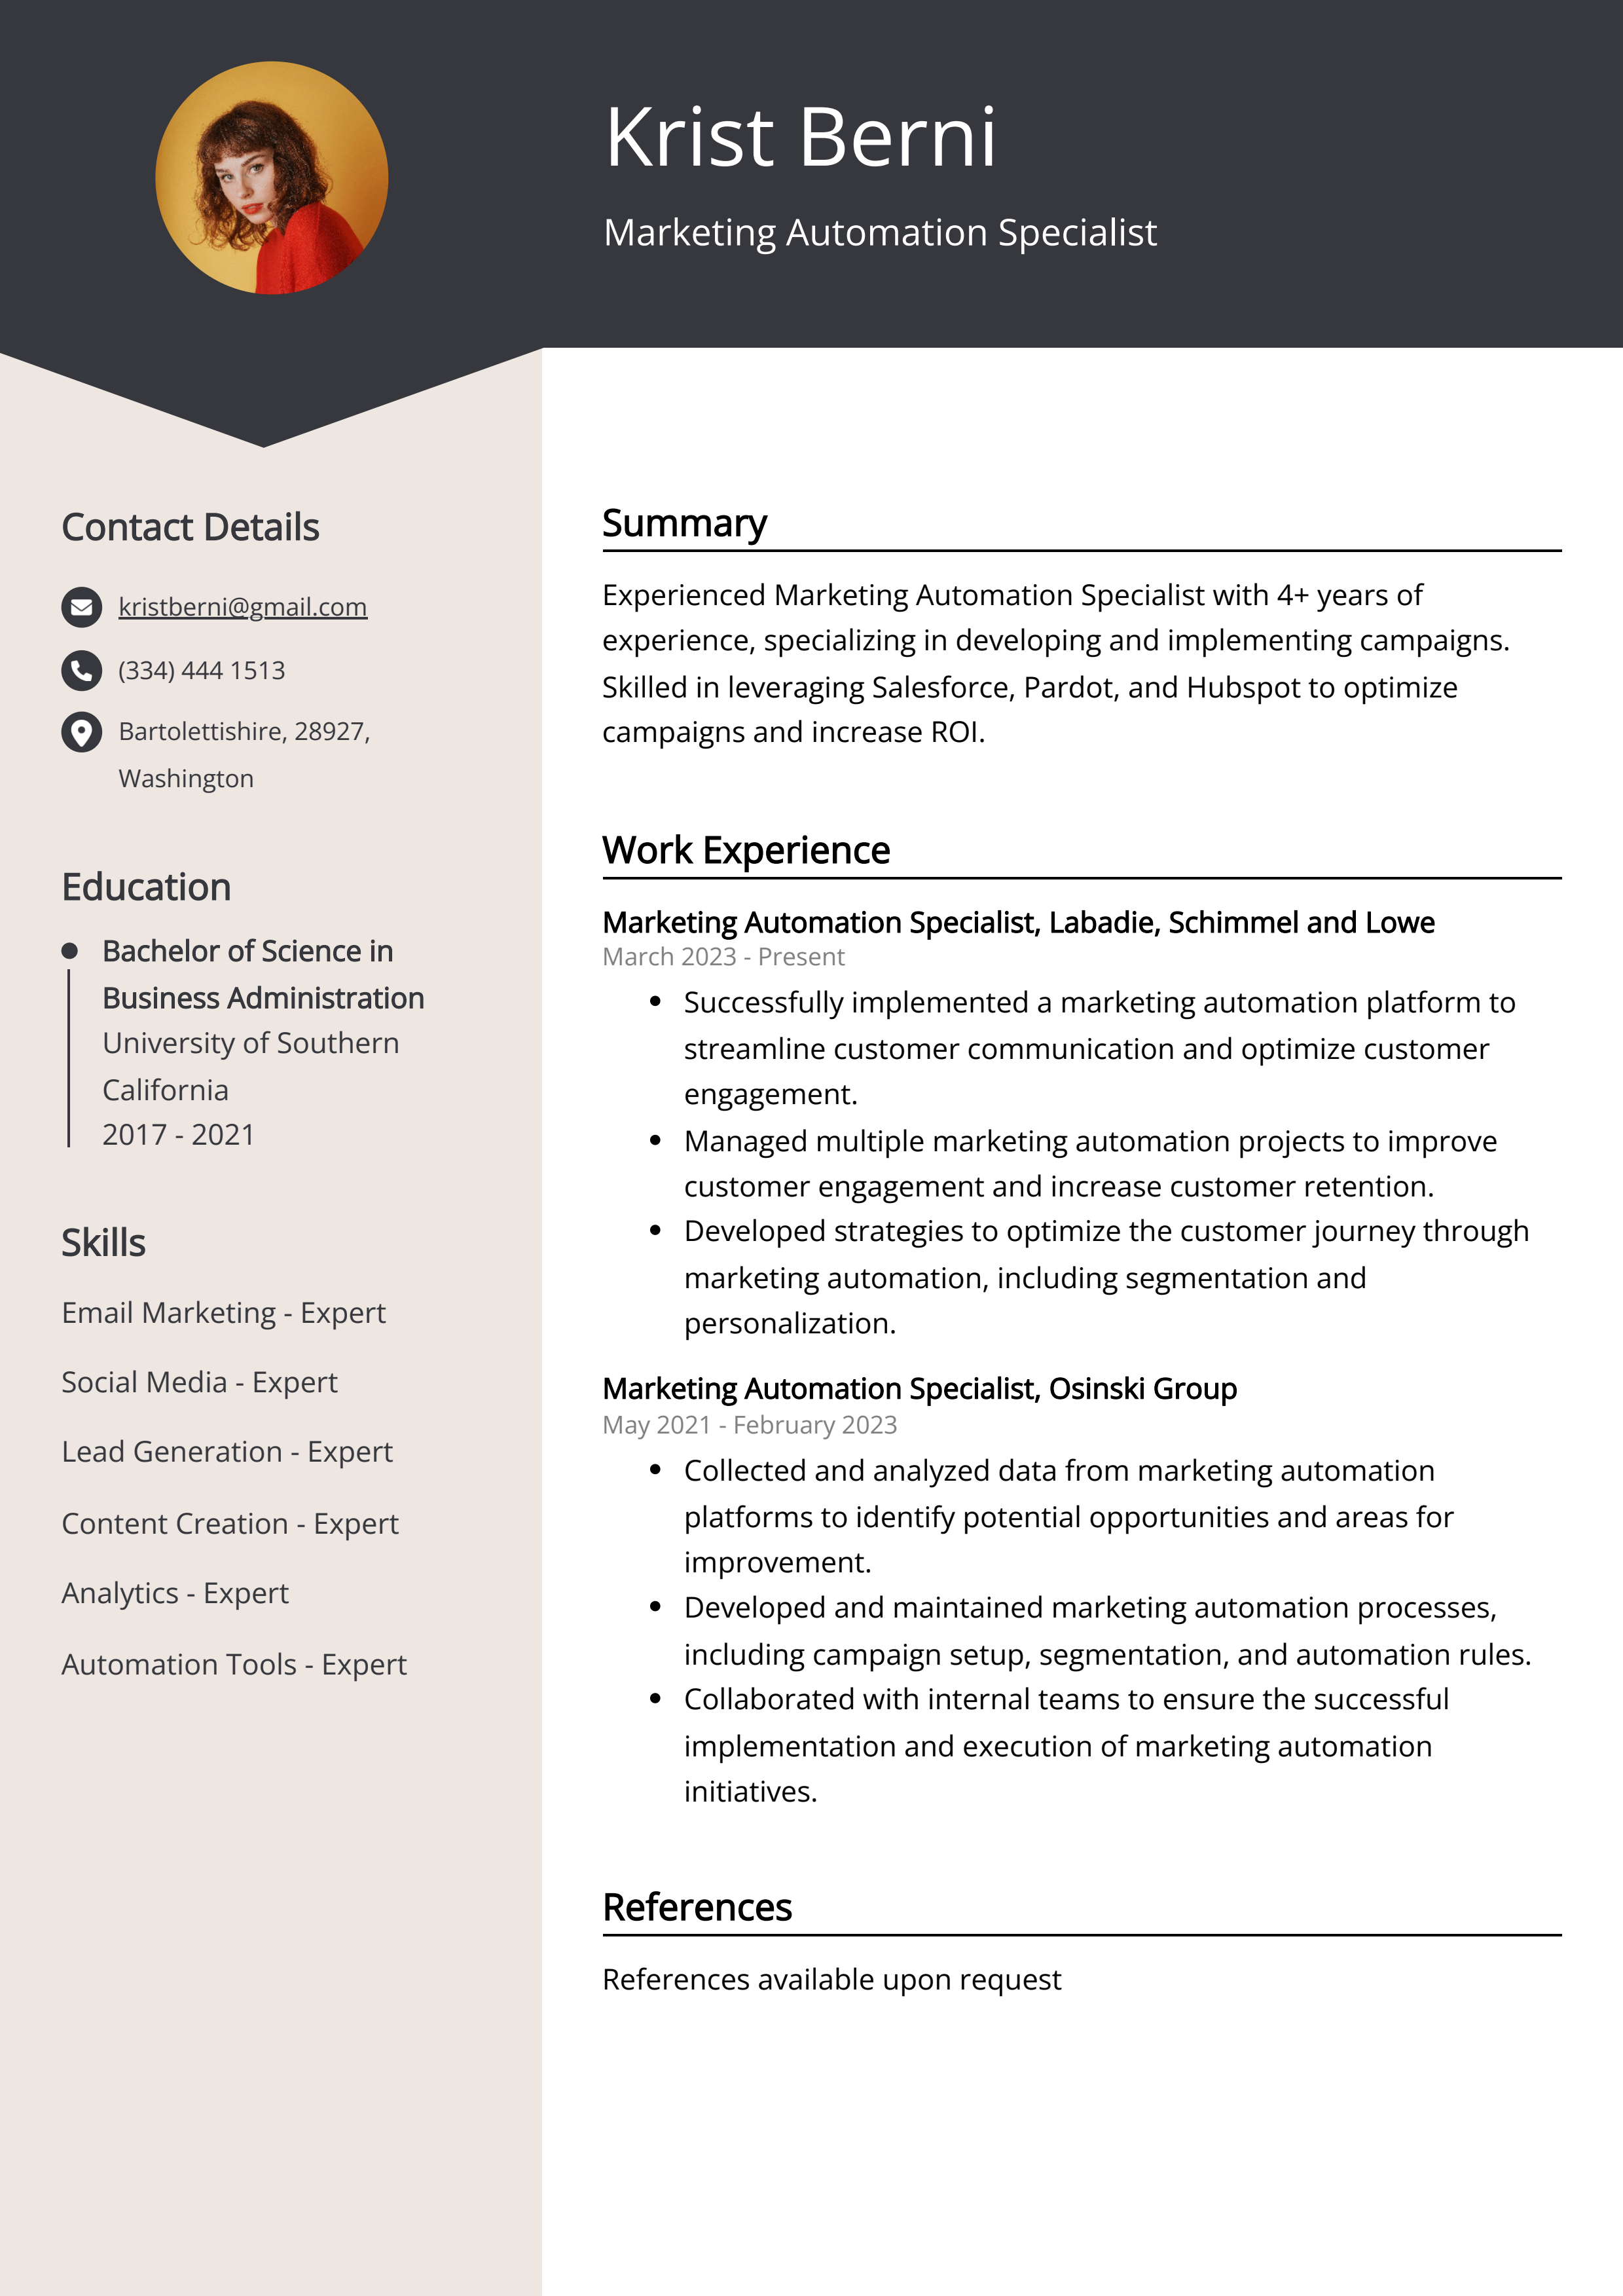 Marketing Automation Specialist CV Example